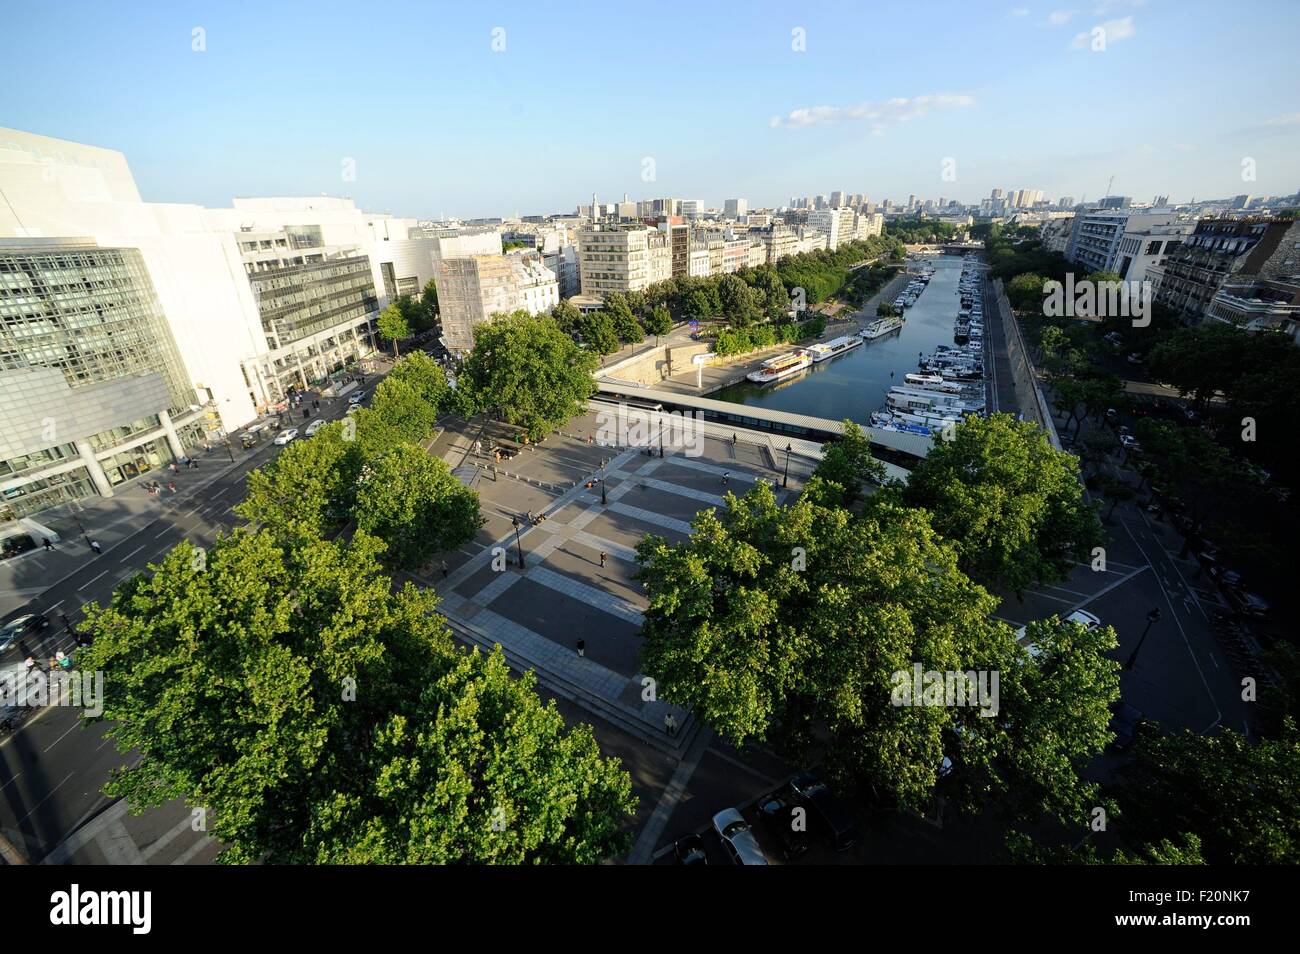 France, Paris, Marina de la Bastille, The basins of Arsenal connects the Canal Saint Martin in the Seine between the platform of the Rapee and Bastille Square (aerial view) Stock Photo